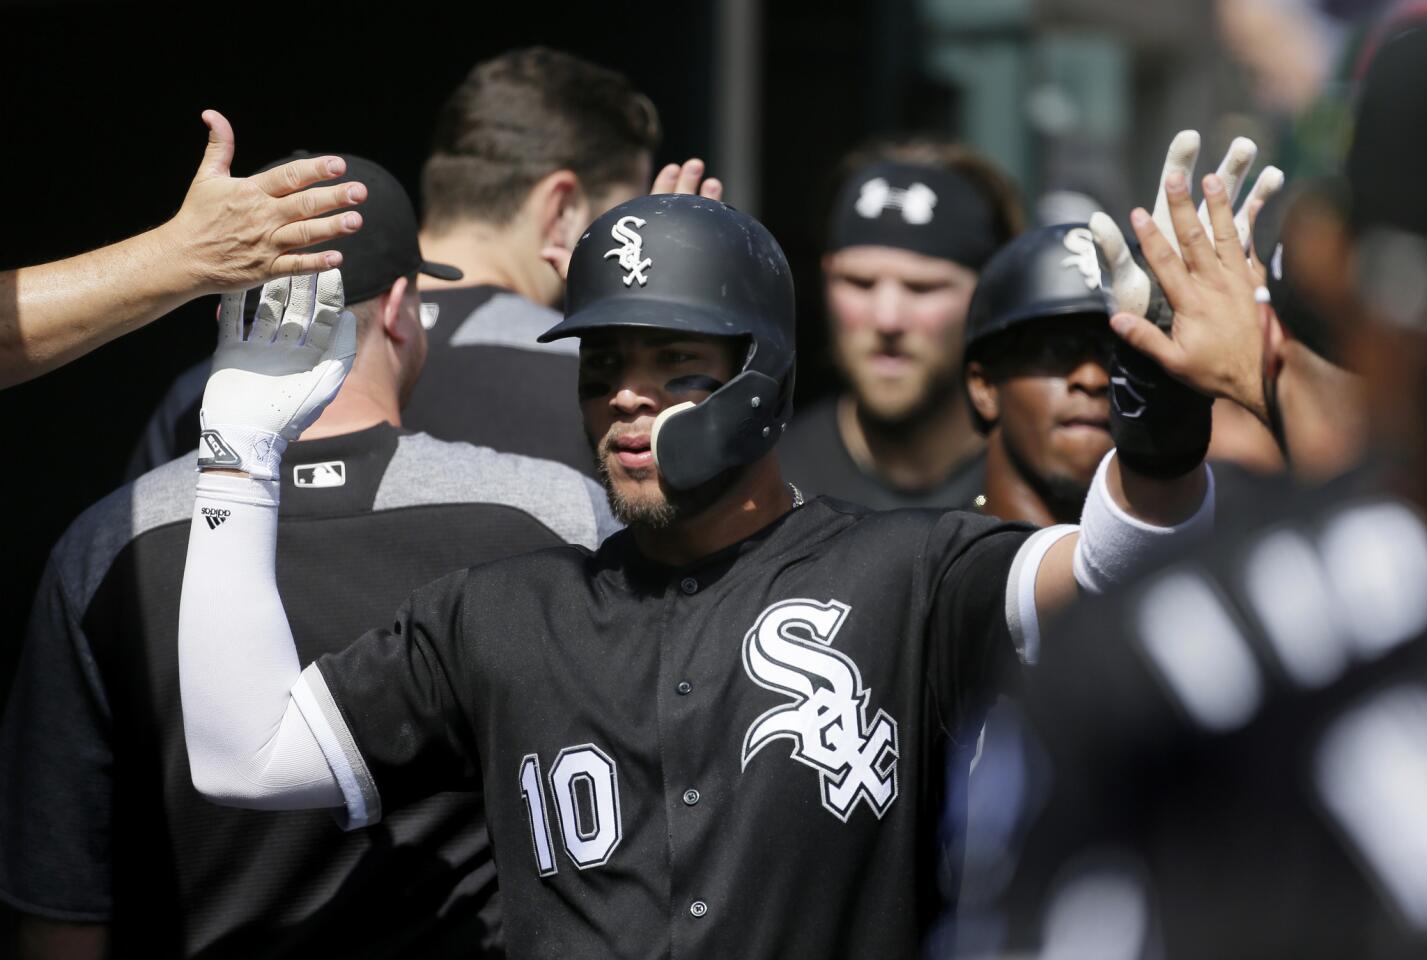 oan Moncada celebrates with teammates after scoring against the Tigers on a single by Avisail Garcia at Comerica Park in Detroit on Sept. 14, 2017.